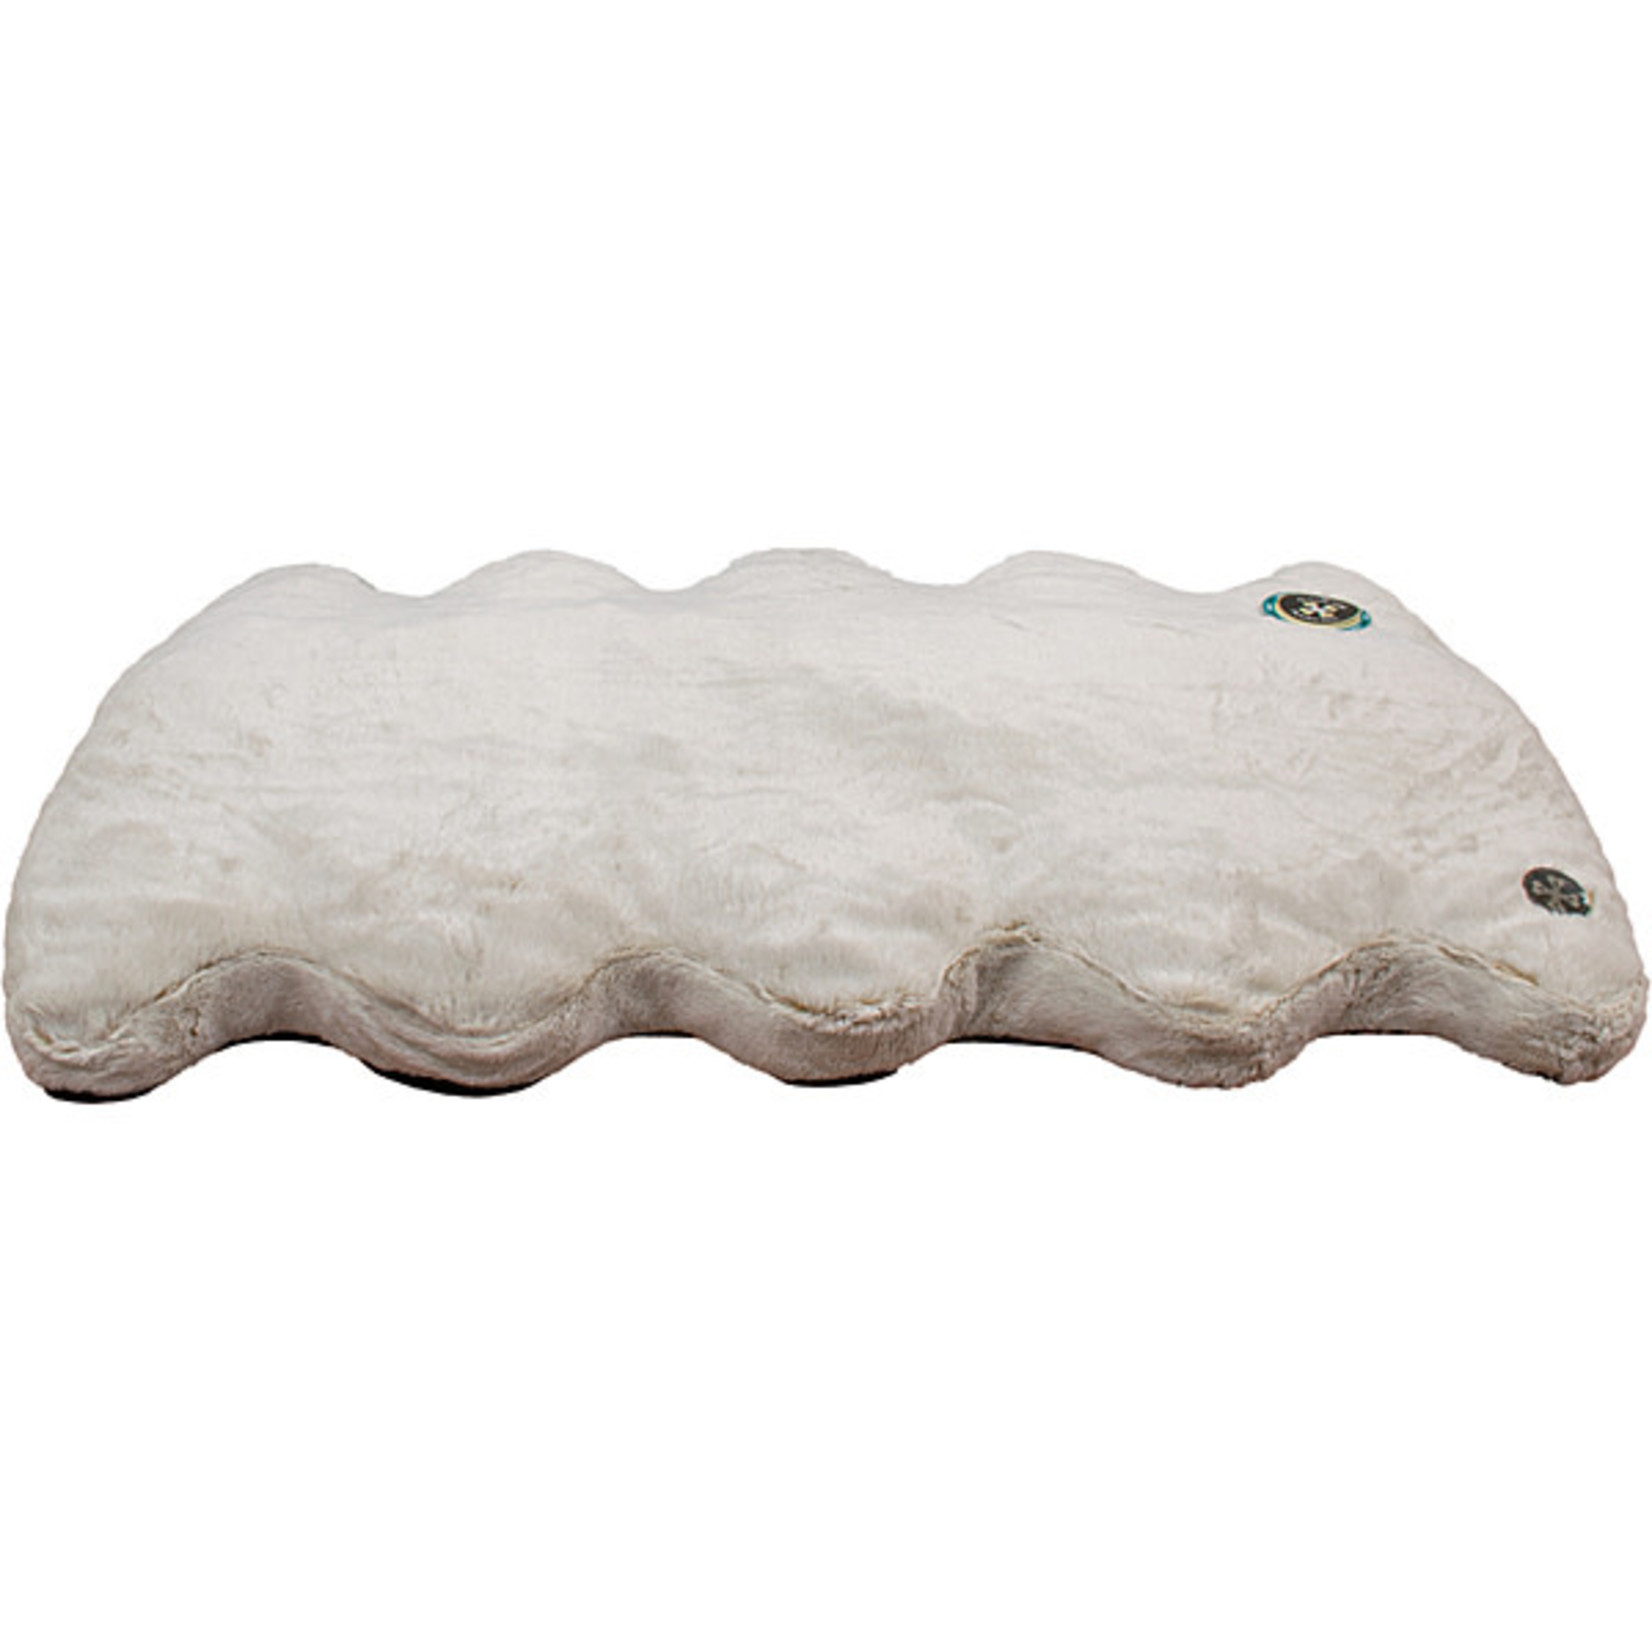 Large Soft Cloud Bed 48x28x2in